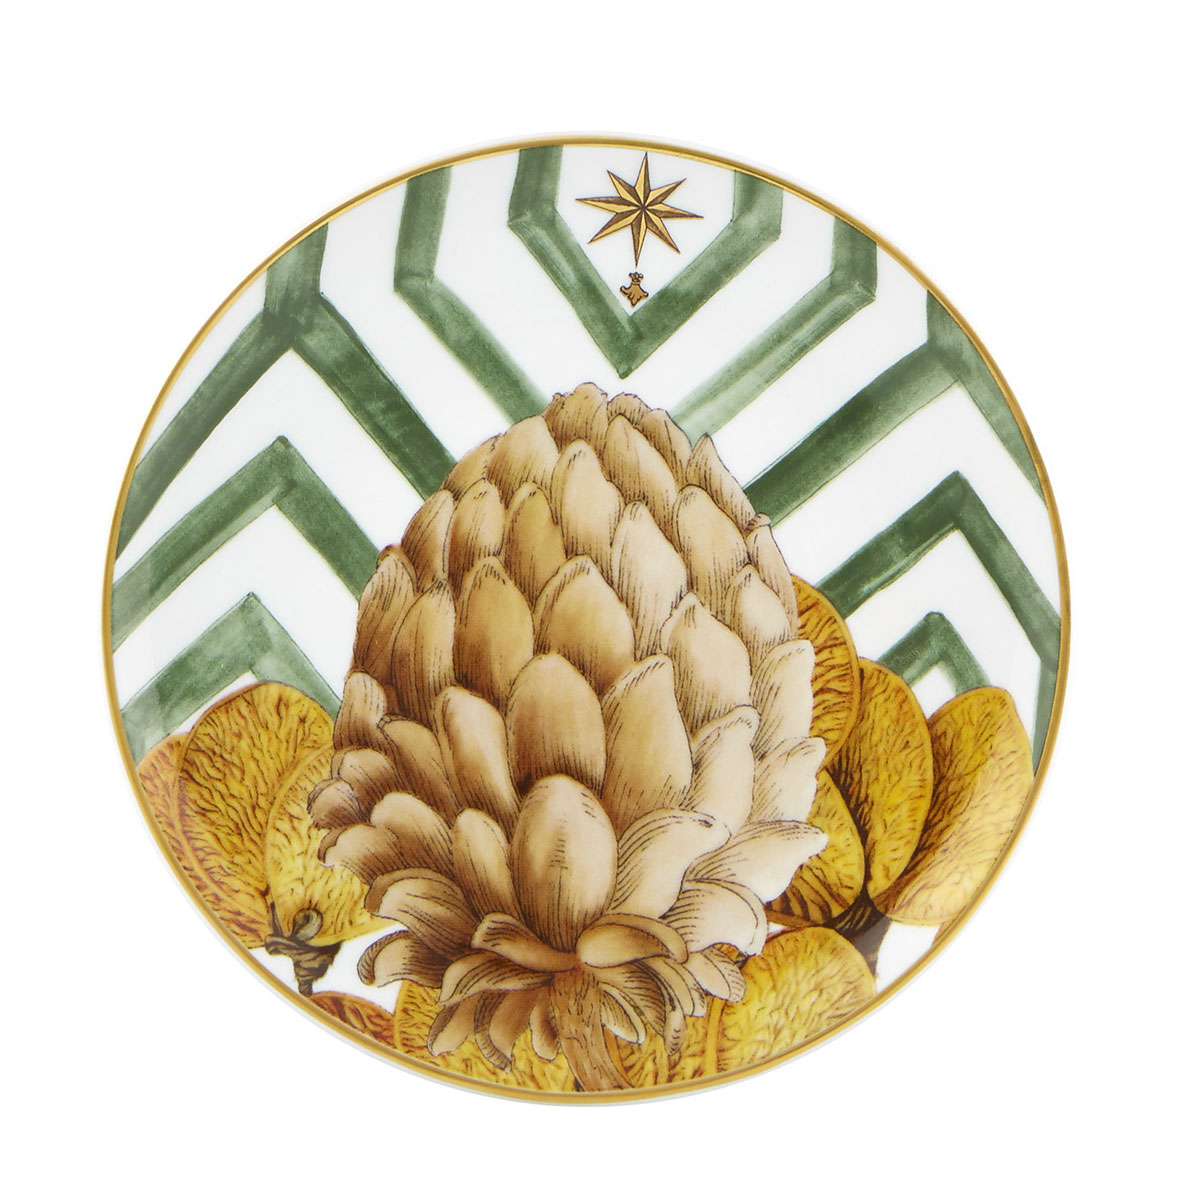 Vista Alegre Porcelain Amazonia Bread And Butter Plate, Set of 4